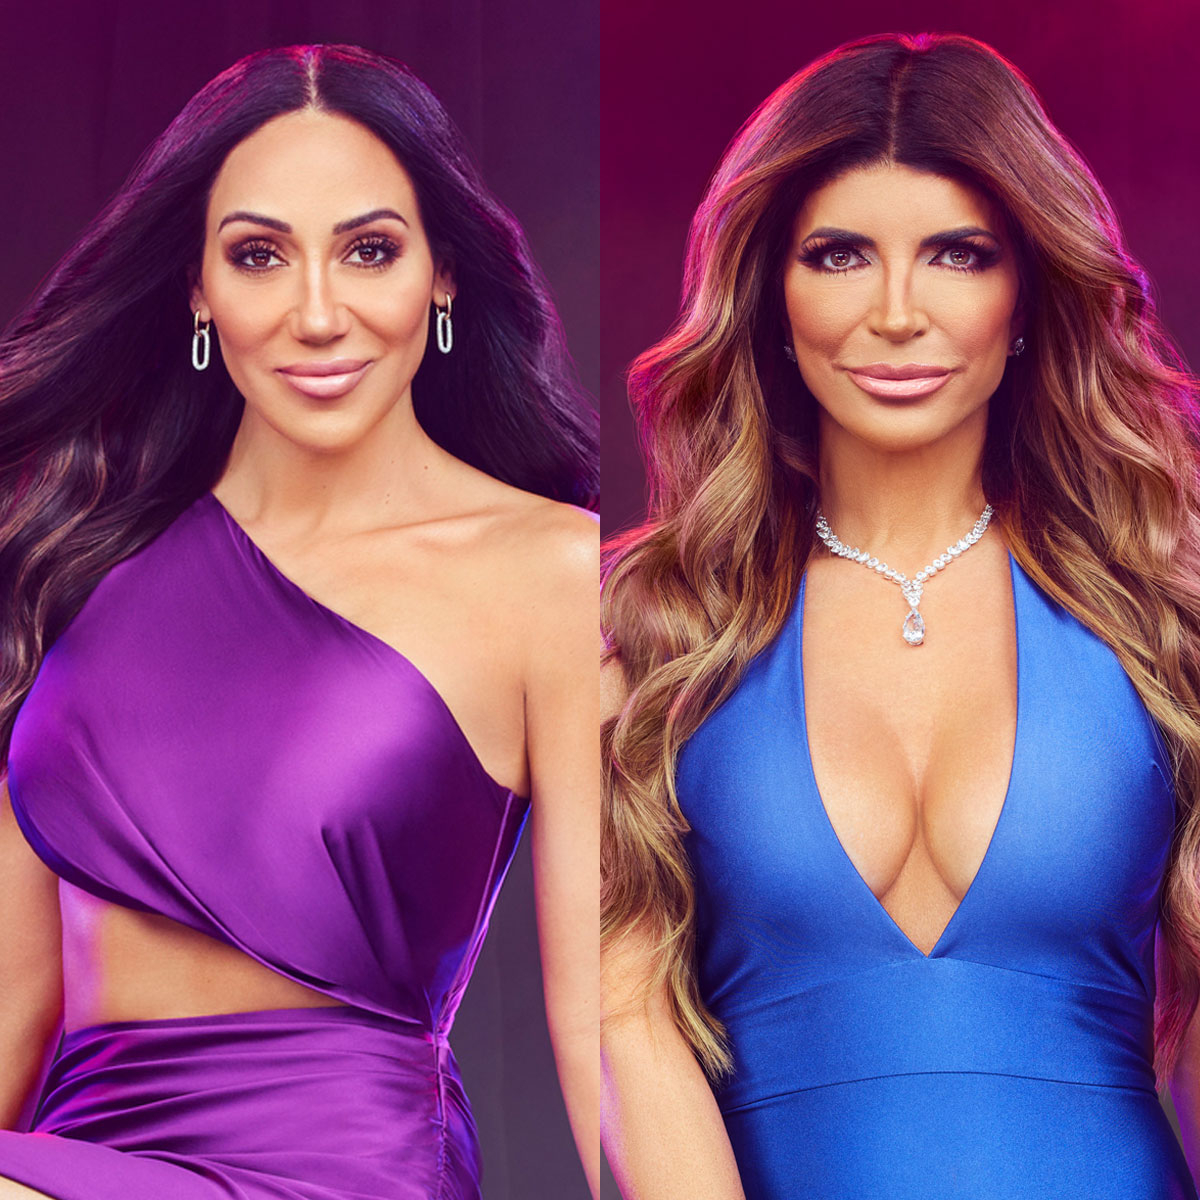 Watch The Real Housewives of New Jersey Season 12, Episode 13